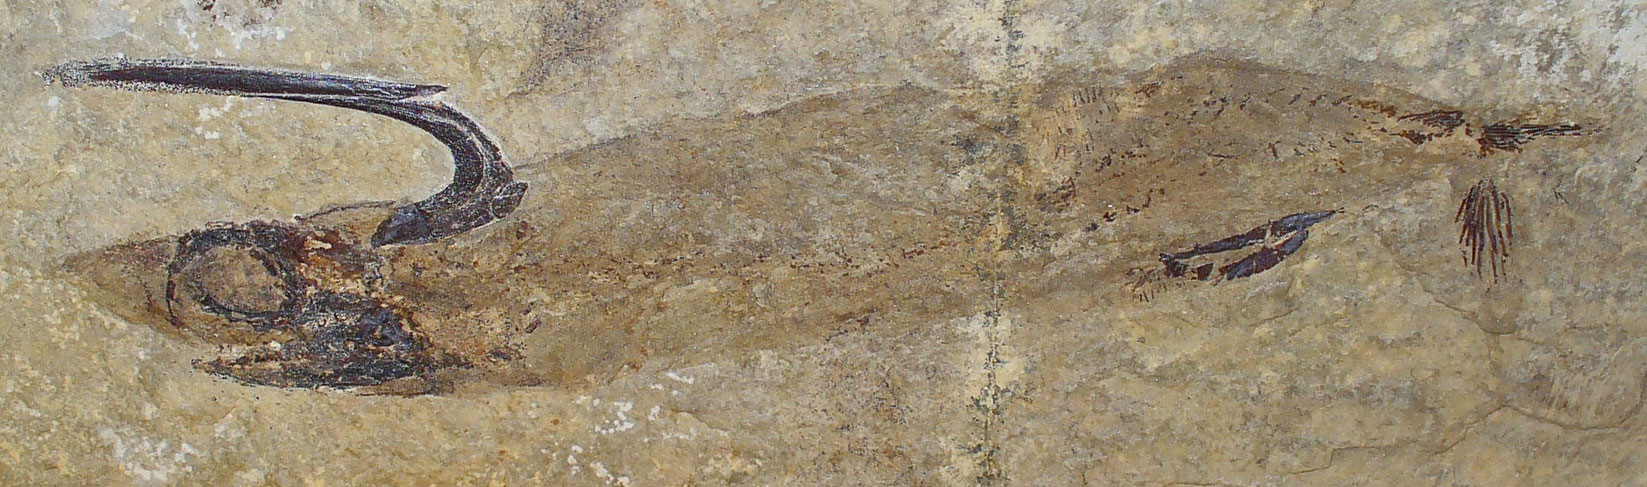 Photograph of a fossil fish from the Mississippian Bear Gulch fauna of Montana. The photo shows a fish preserved in side view on a tan rock. The fish has a large eye and a big hook-like structure emerging from behind its head and curving forward.